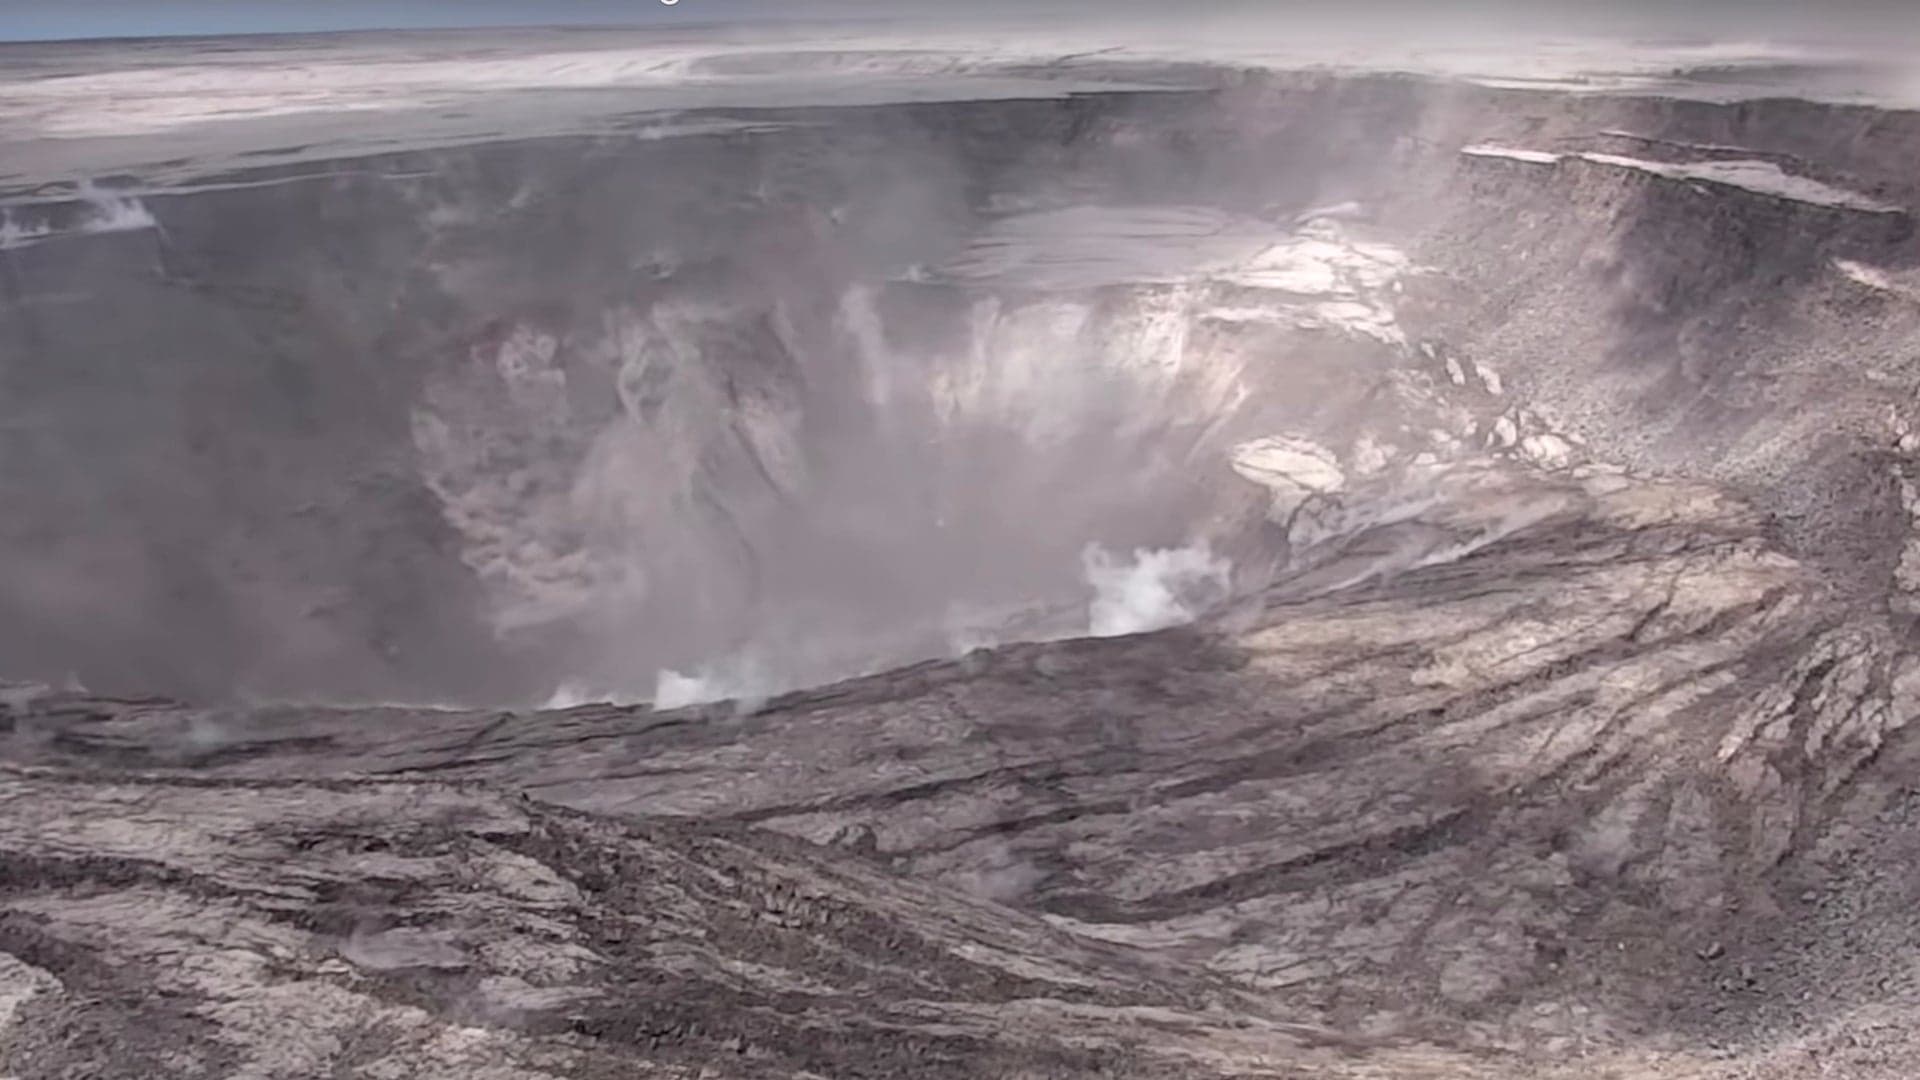 Watch the US Geological Survey’s Drone Footage of Hawaii’s Kilauea Volcano Crater